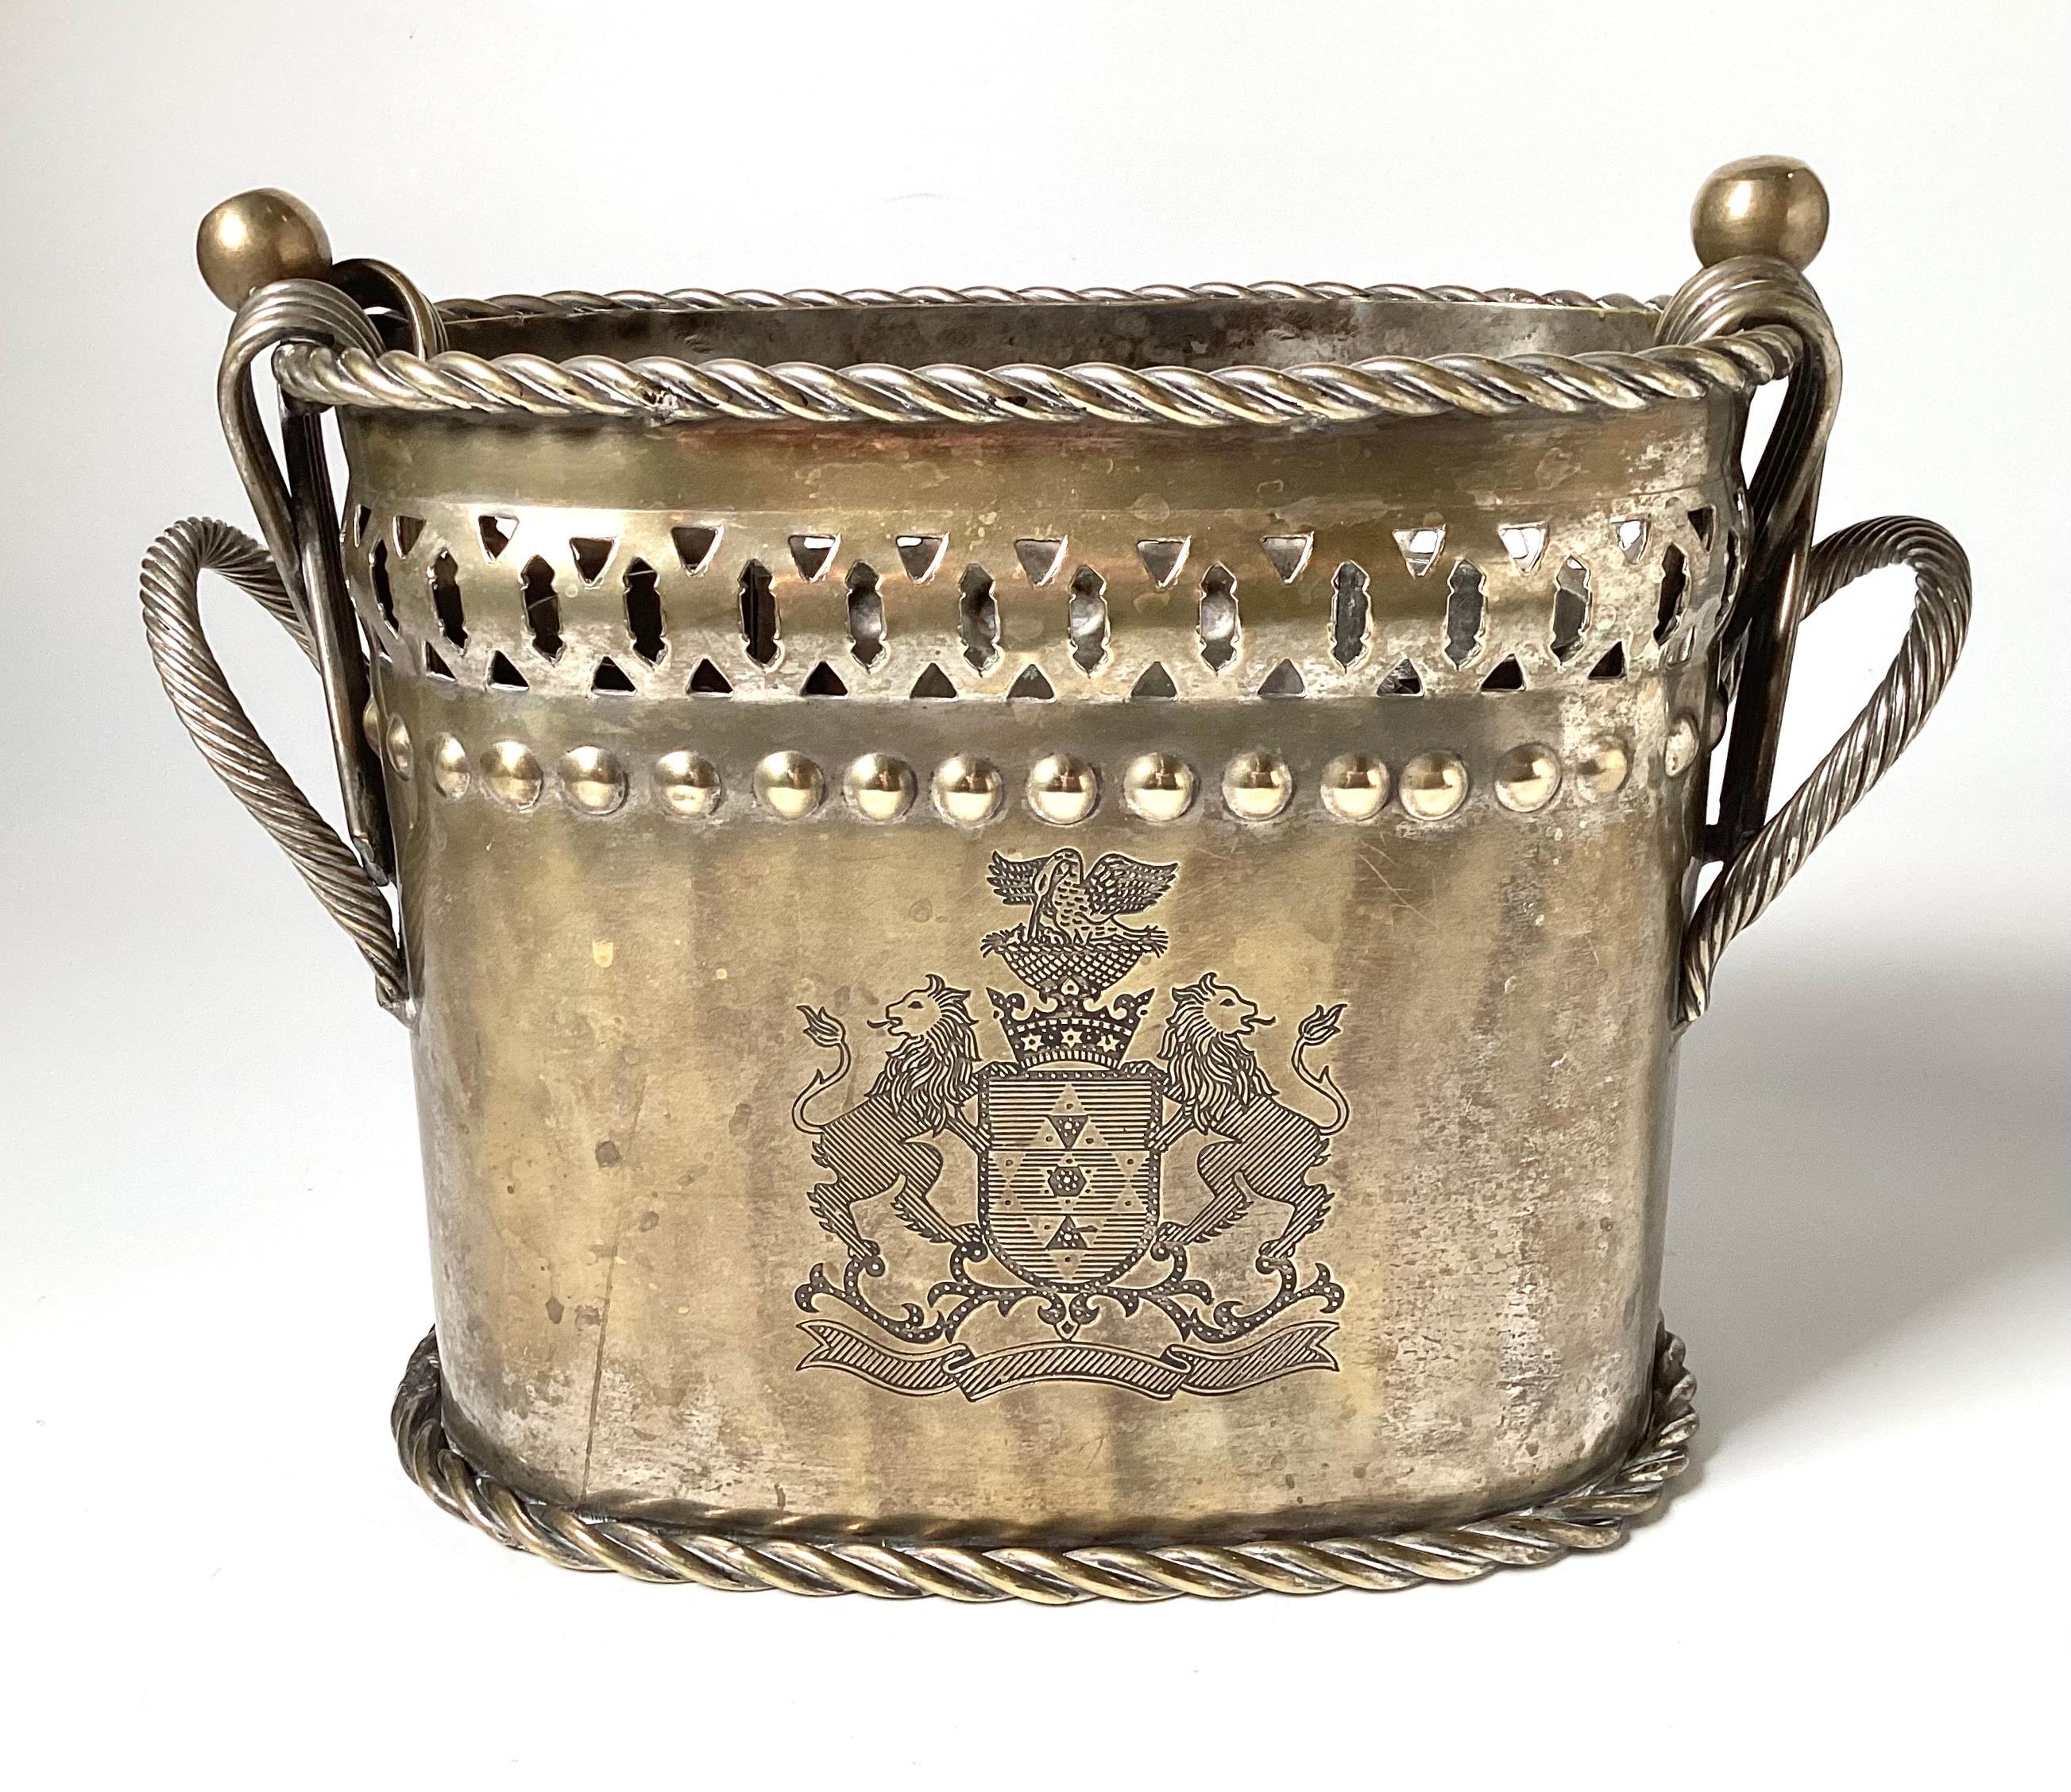 An Antique English wine holder in a worn silvered brass. The The front with an Armorial engraved crest. The brass base with some silvering on the surface.